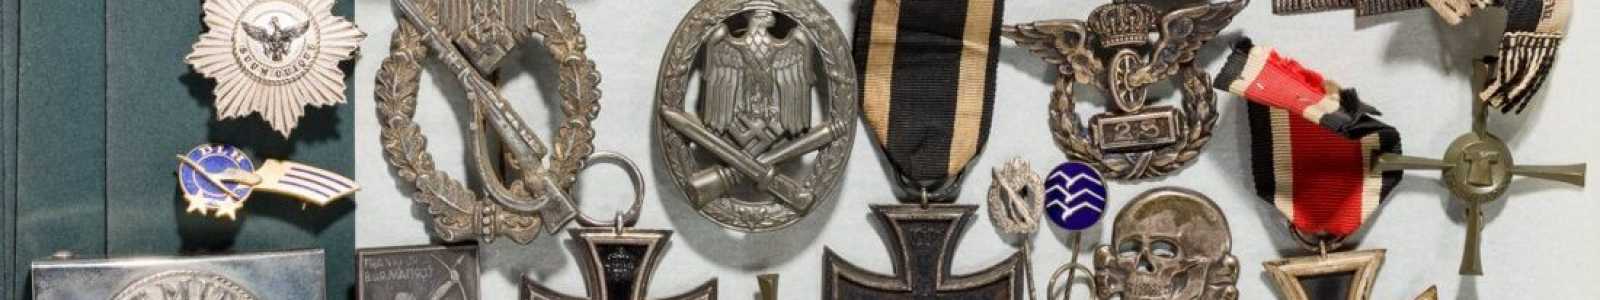 O82r - Day 1: German contemporary history - orders and militaria from 1919